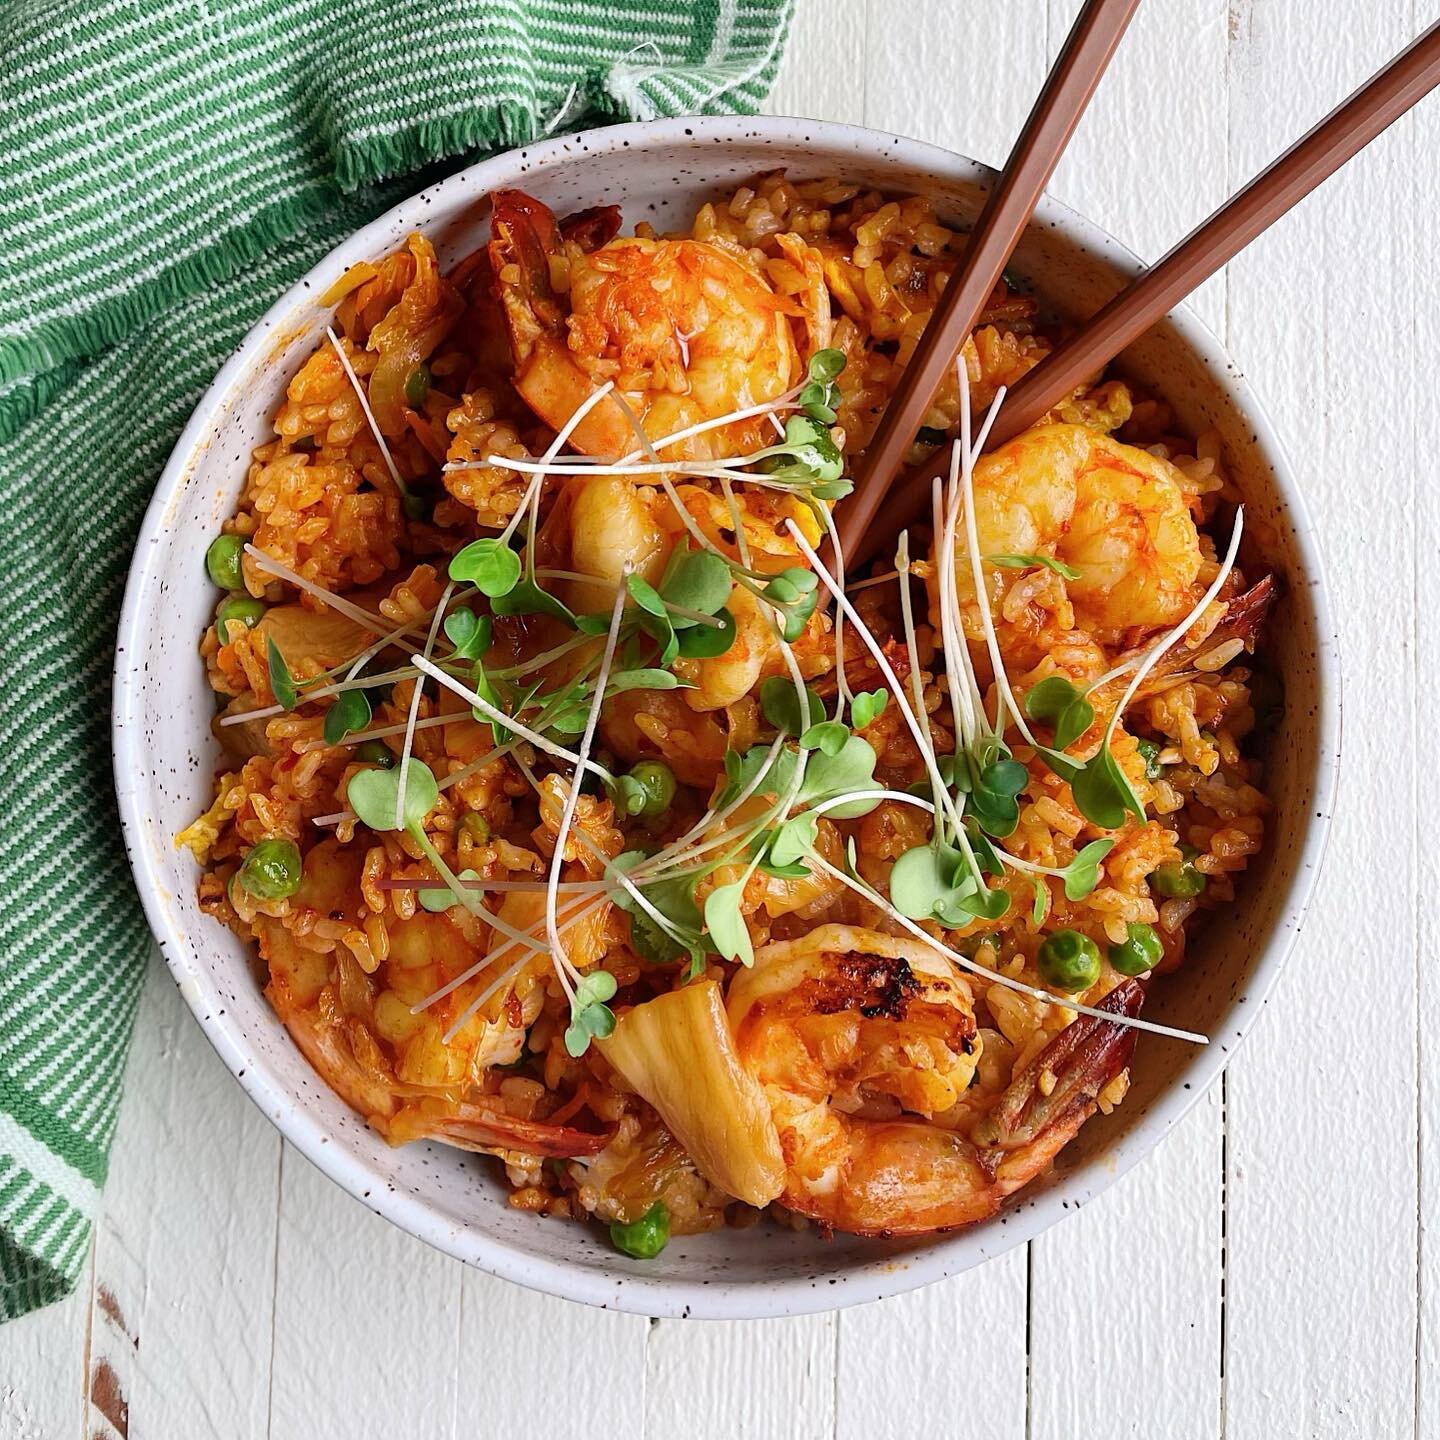 🍤Sign up for the Grub Newsletter to get all my delish recipes before anyone else! {link in bio} 

The April newsletter hits your inbox this Monday and in it you&rsquo;ll find the recipe for this Spicy Shrimp &amp; Kimchi Rice Bowl&mdash; topped with